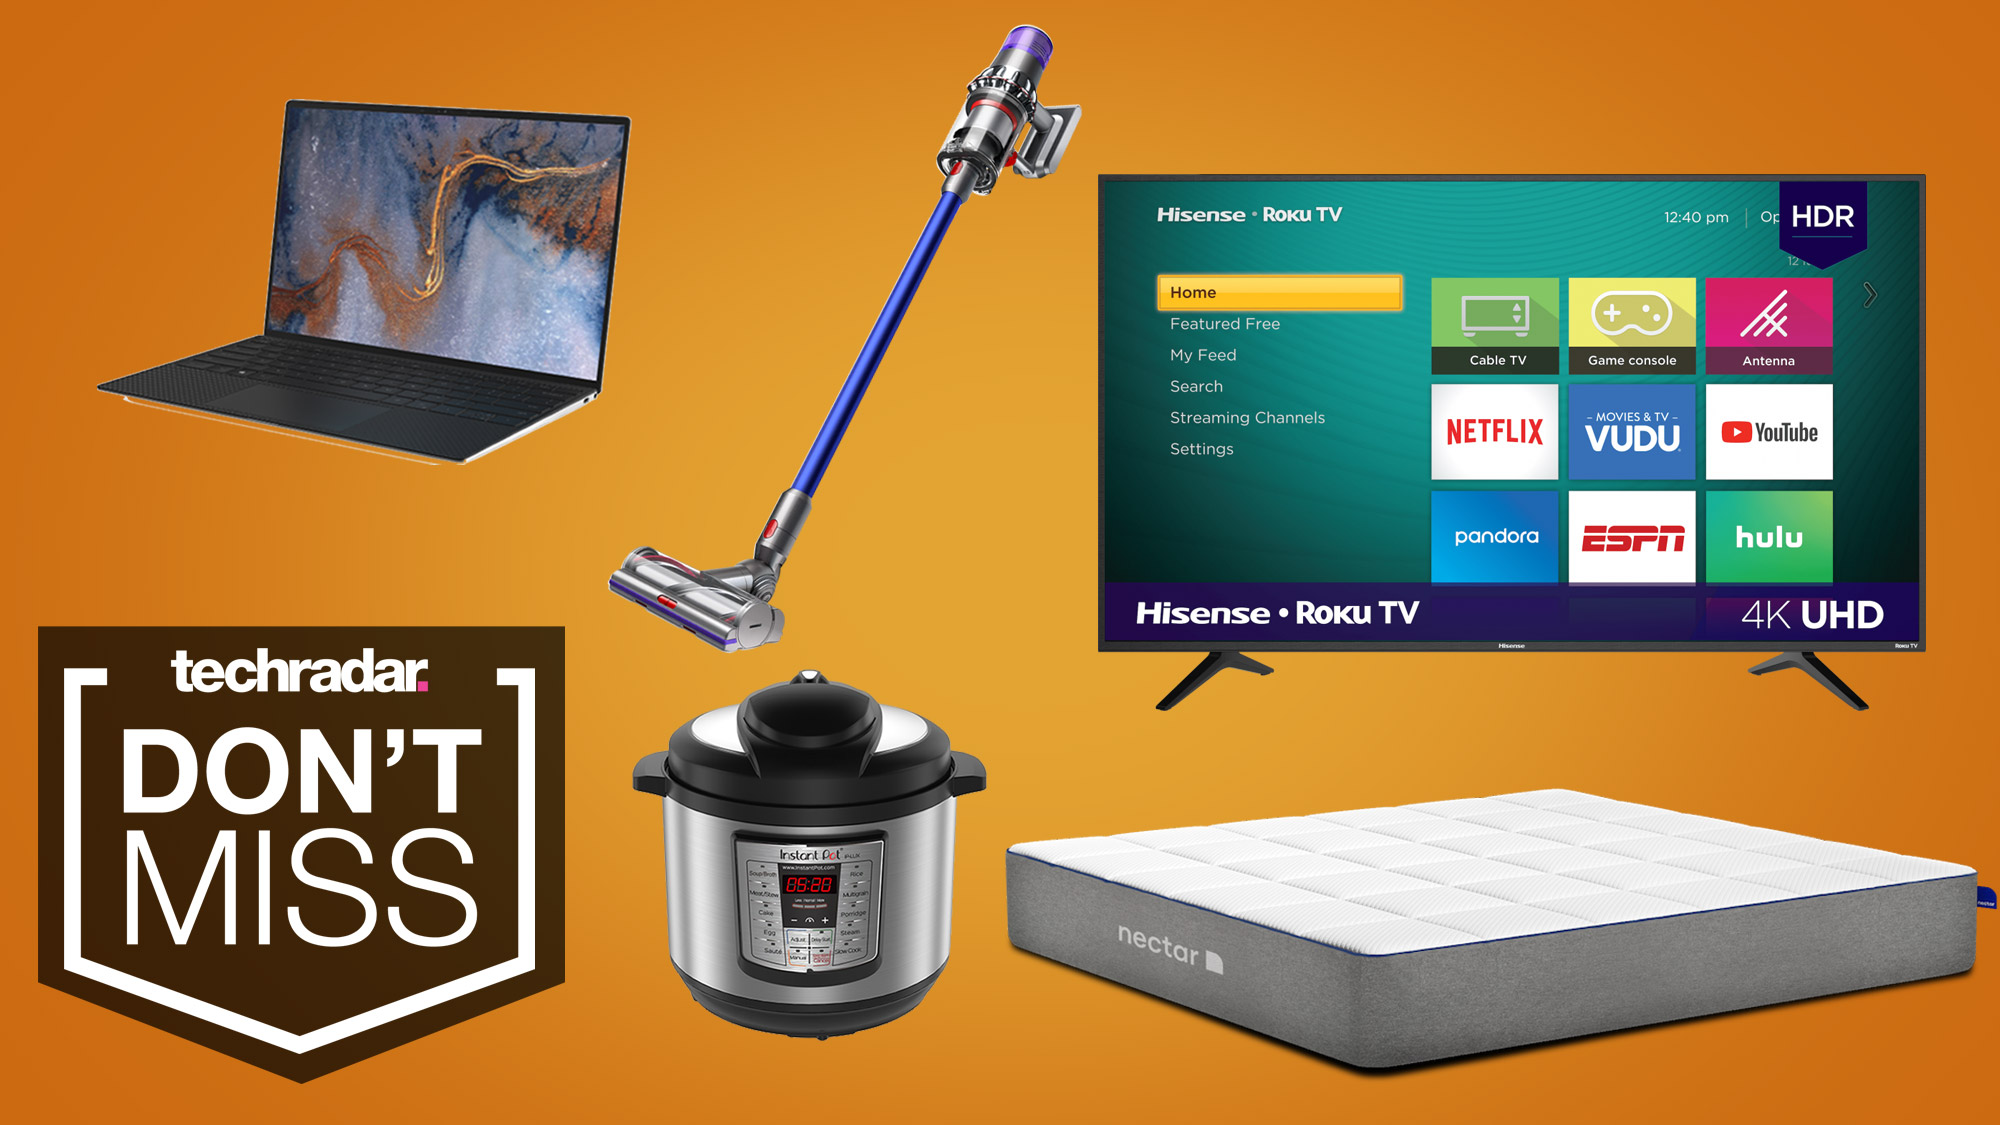 Best spring sales 2021 deals from Best Buy, Home Depot, Walmart, and